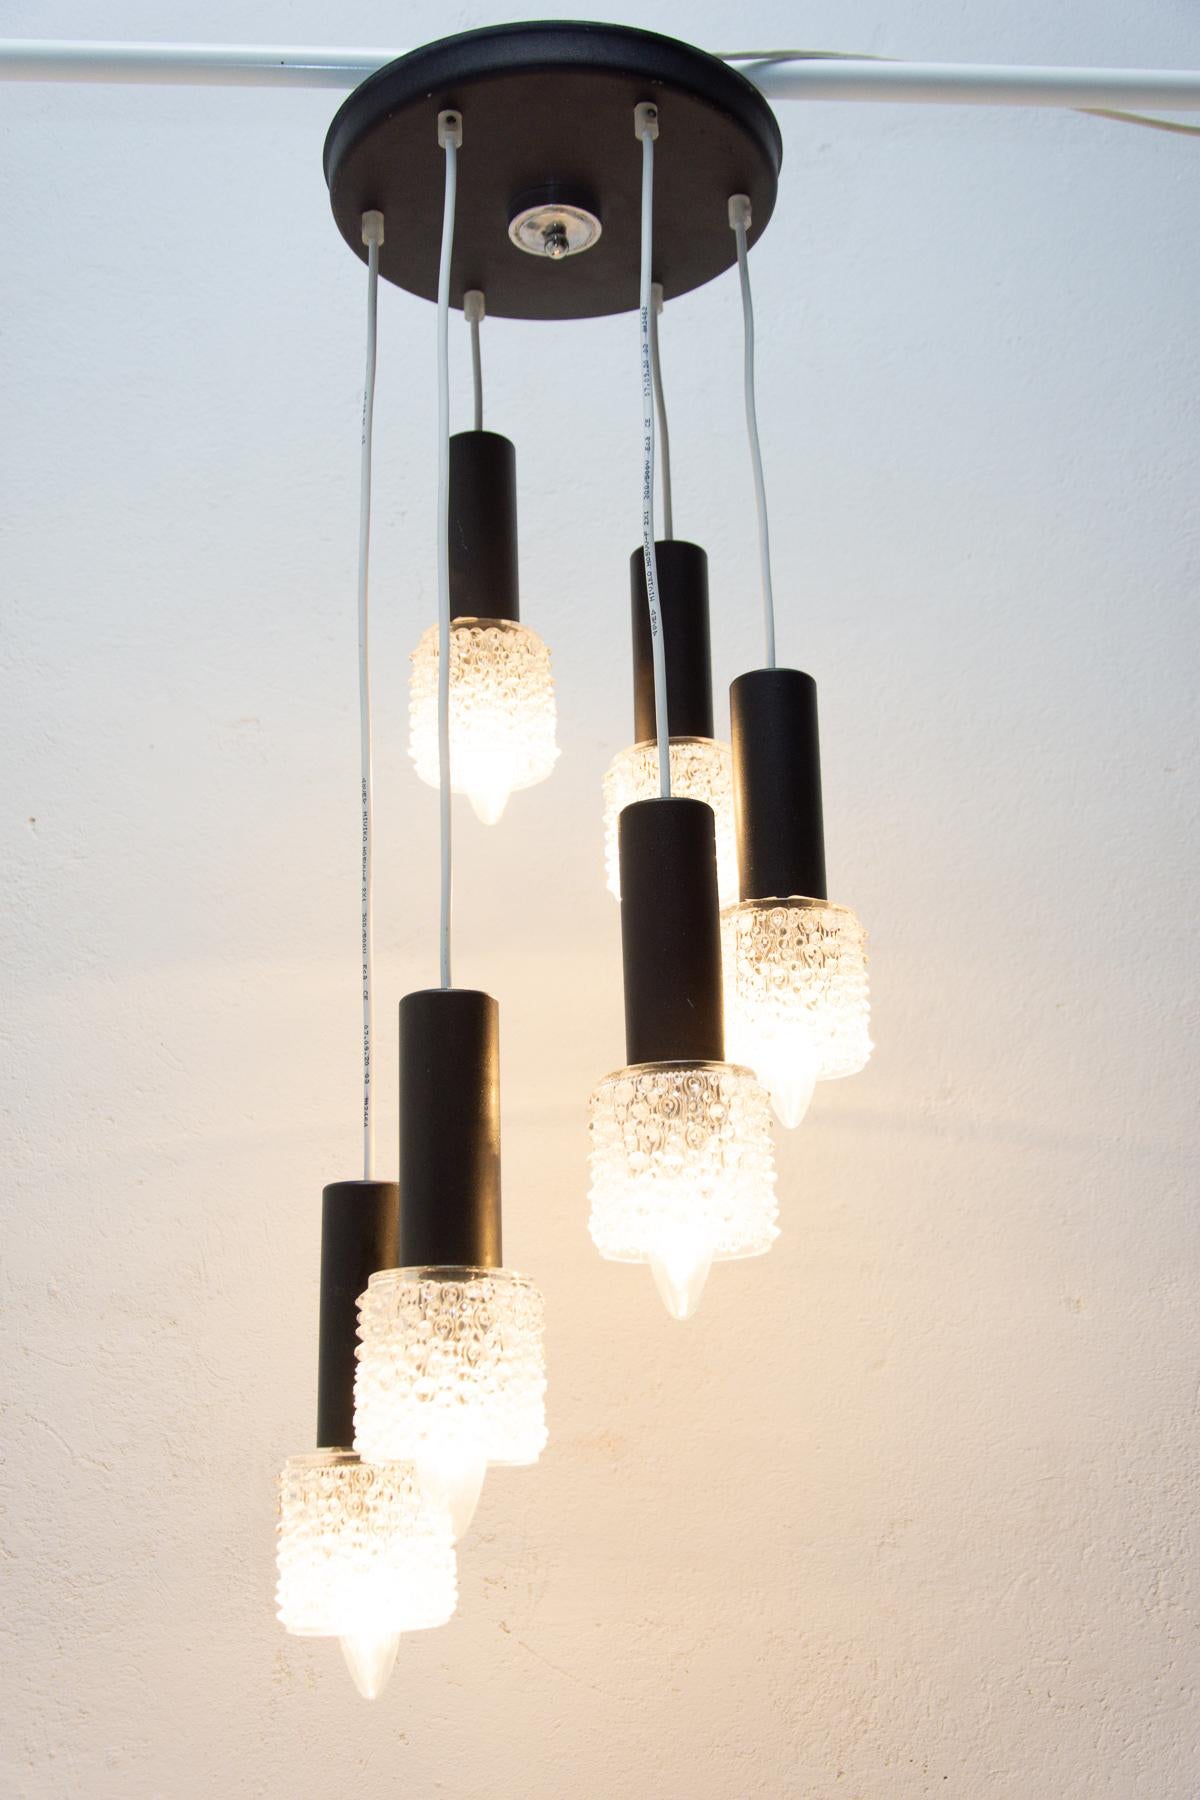 Vintage hanging chandelier from Instala Decín company, hanging six cut glass lamshades at 6 insulated electrical cables. In the style of Italian chandeliers. New wiring. Material: metal, cut glass.

This is a fixture of the 60/70´s made in